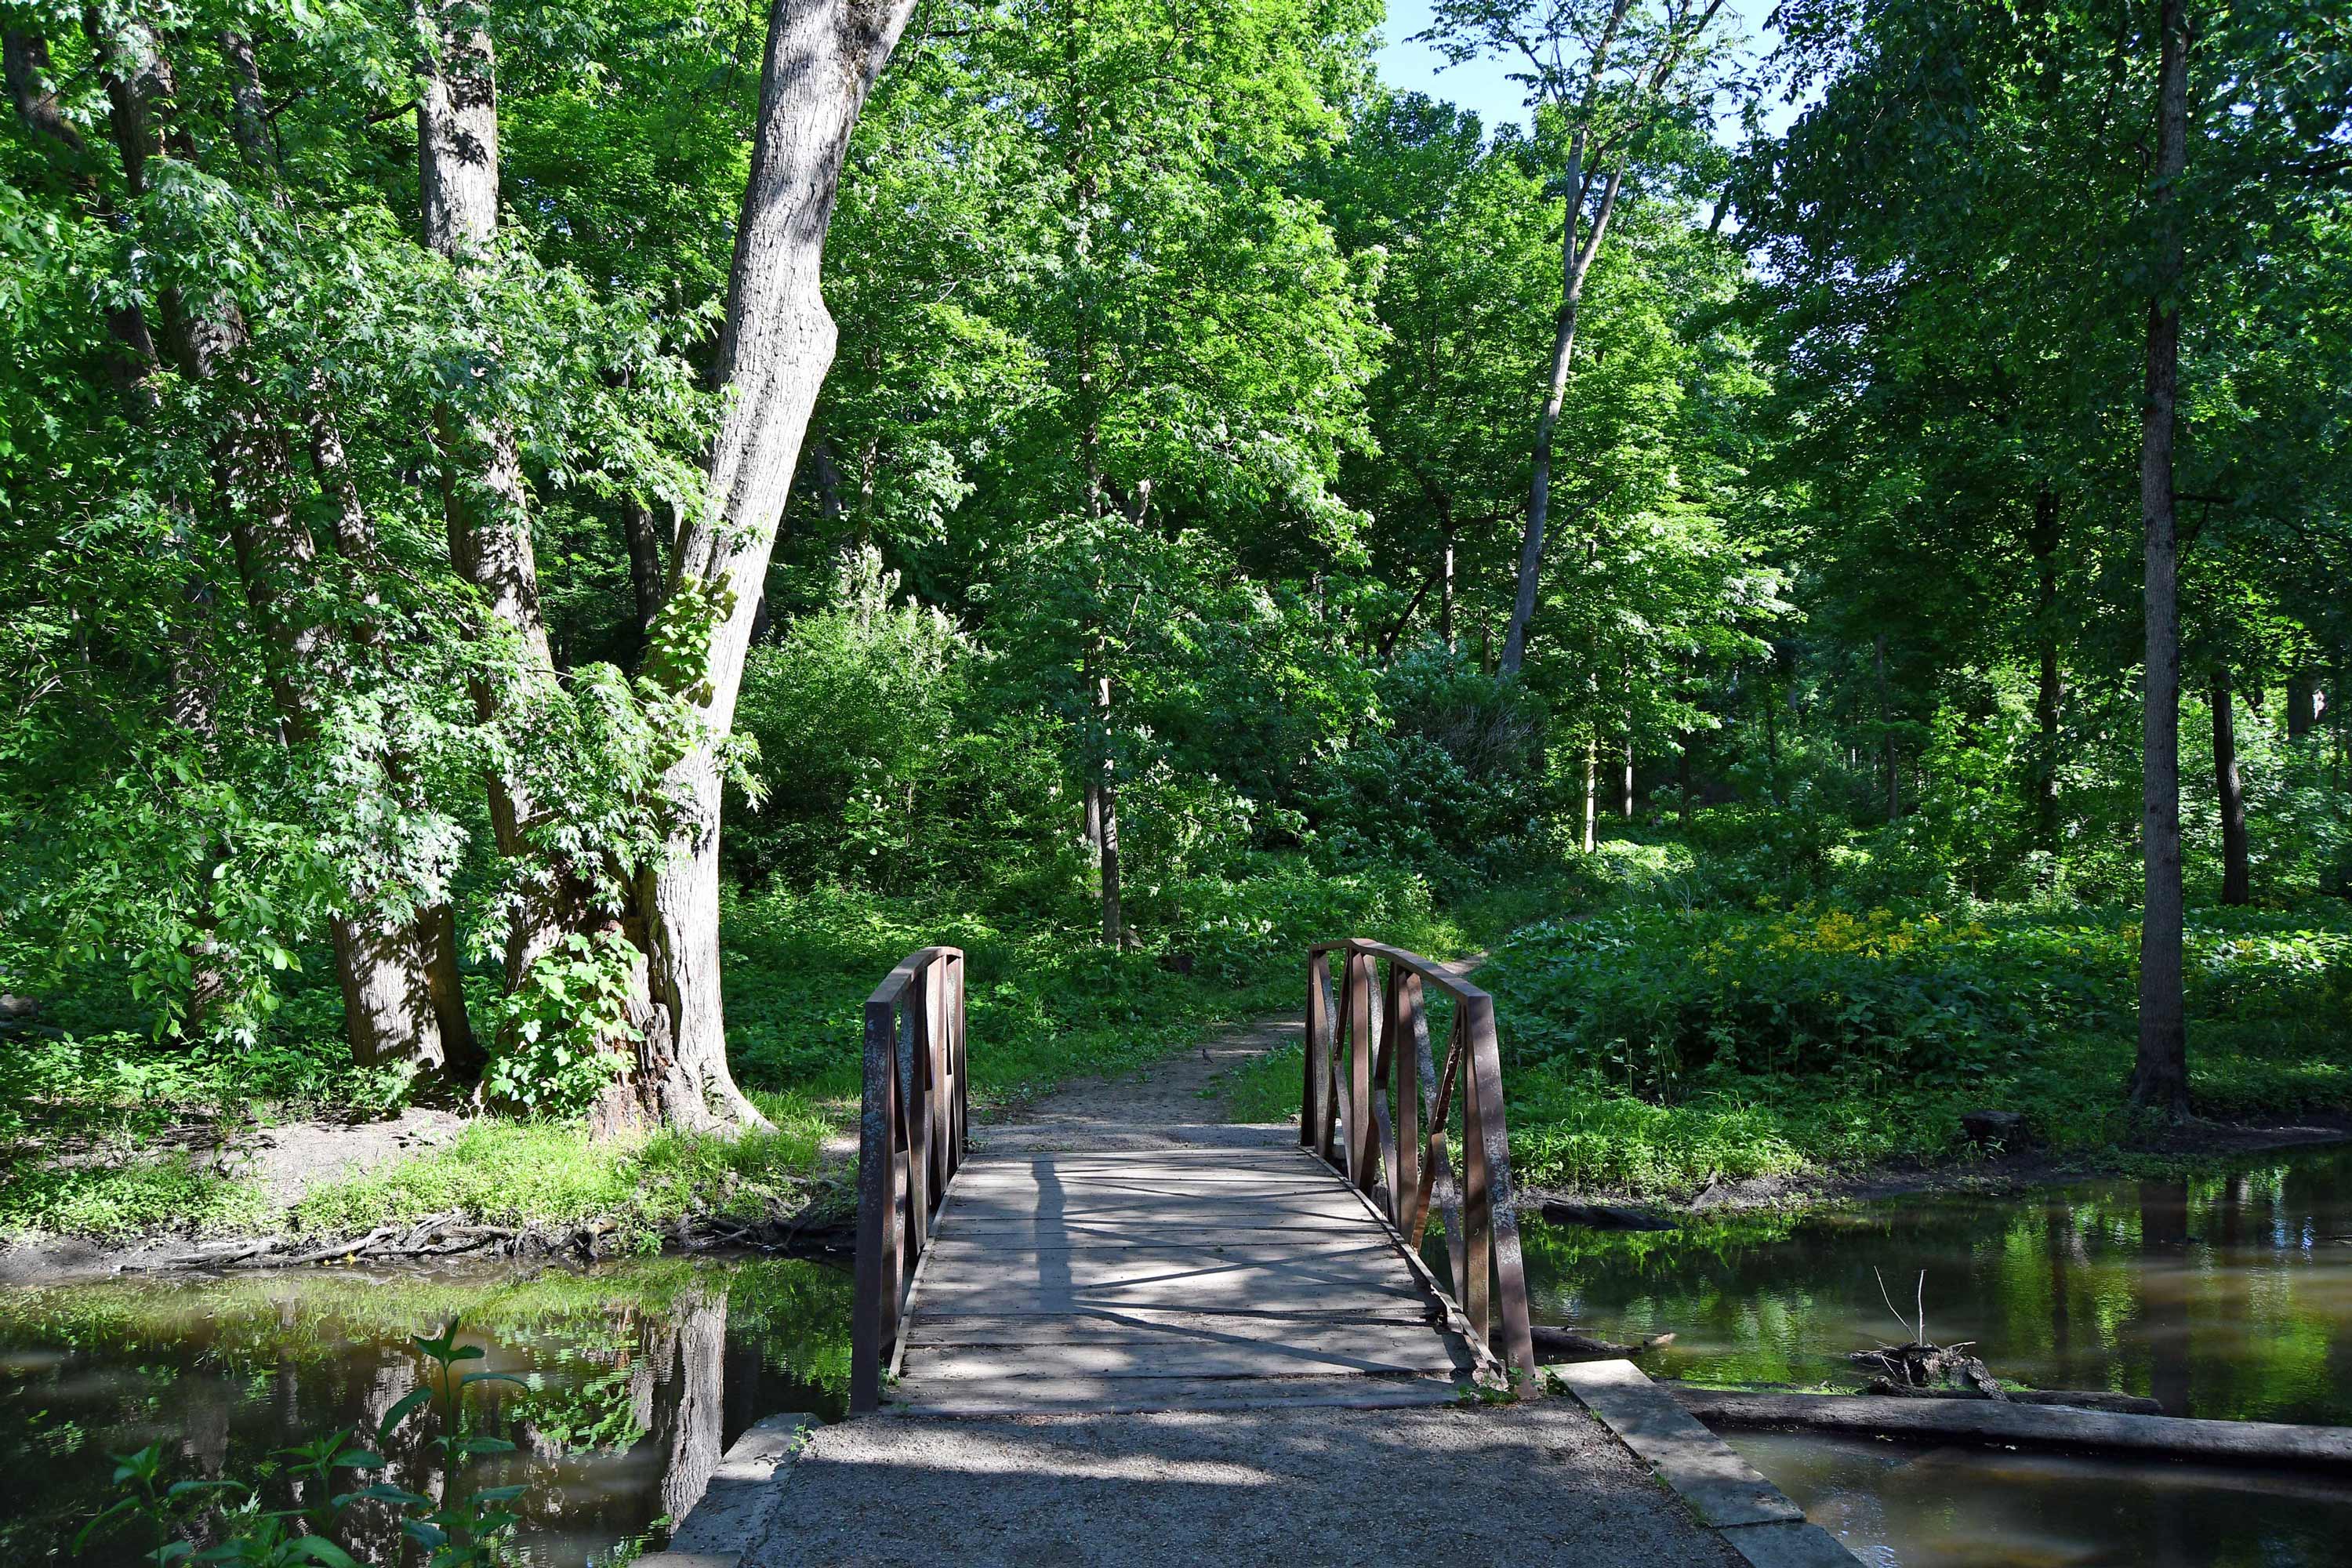 A view of the trail at Messenger Woods.